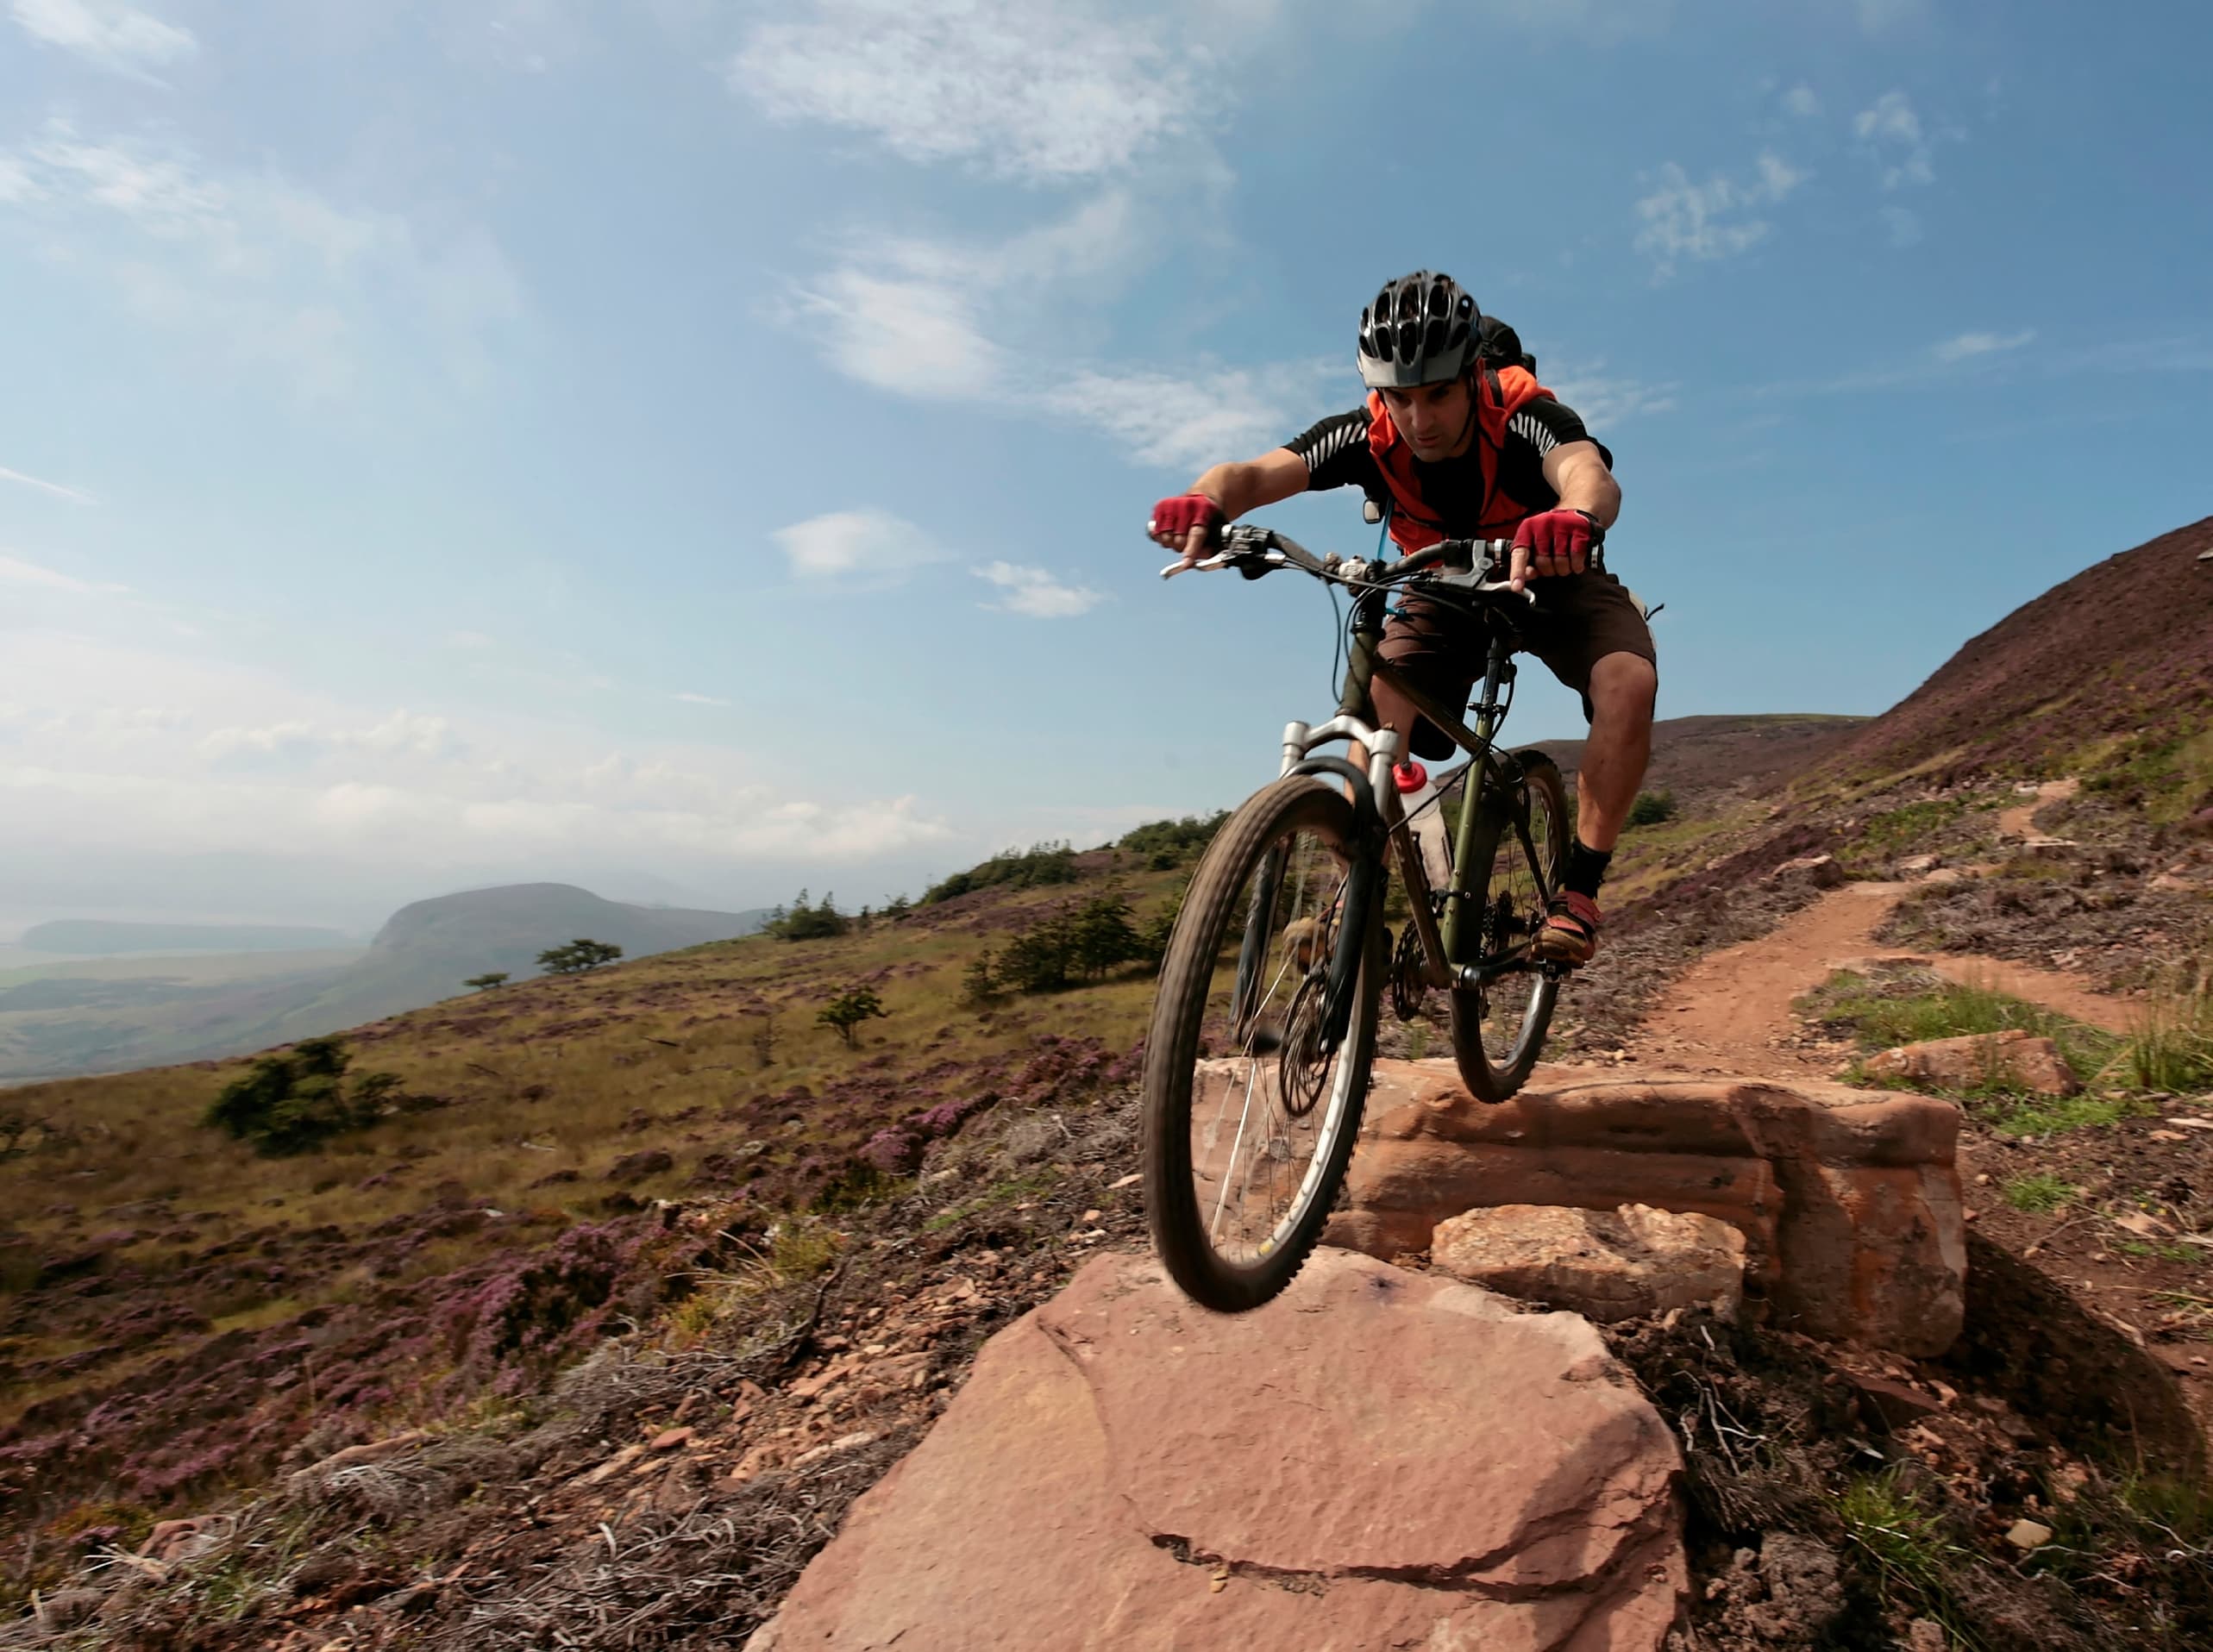 Two mountain bikers take on a technical cross country course